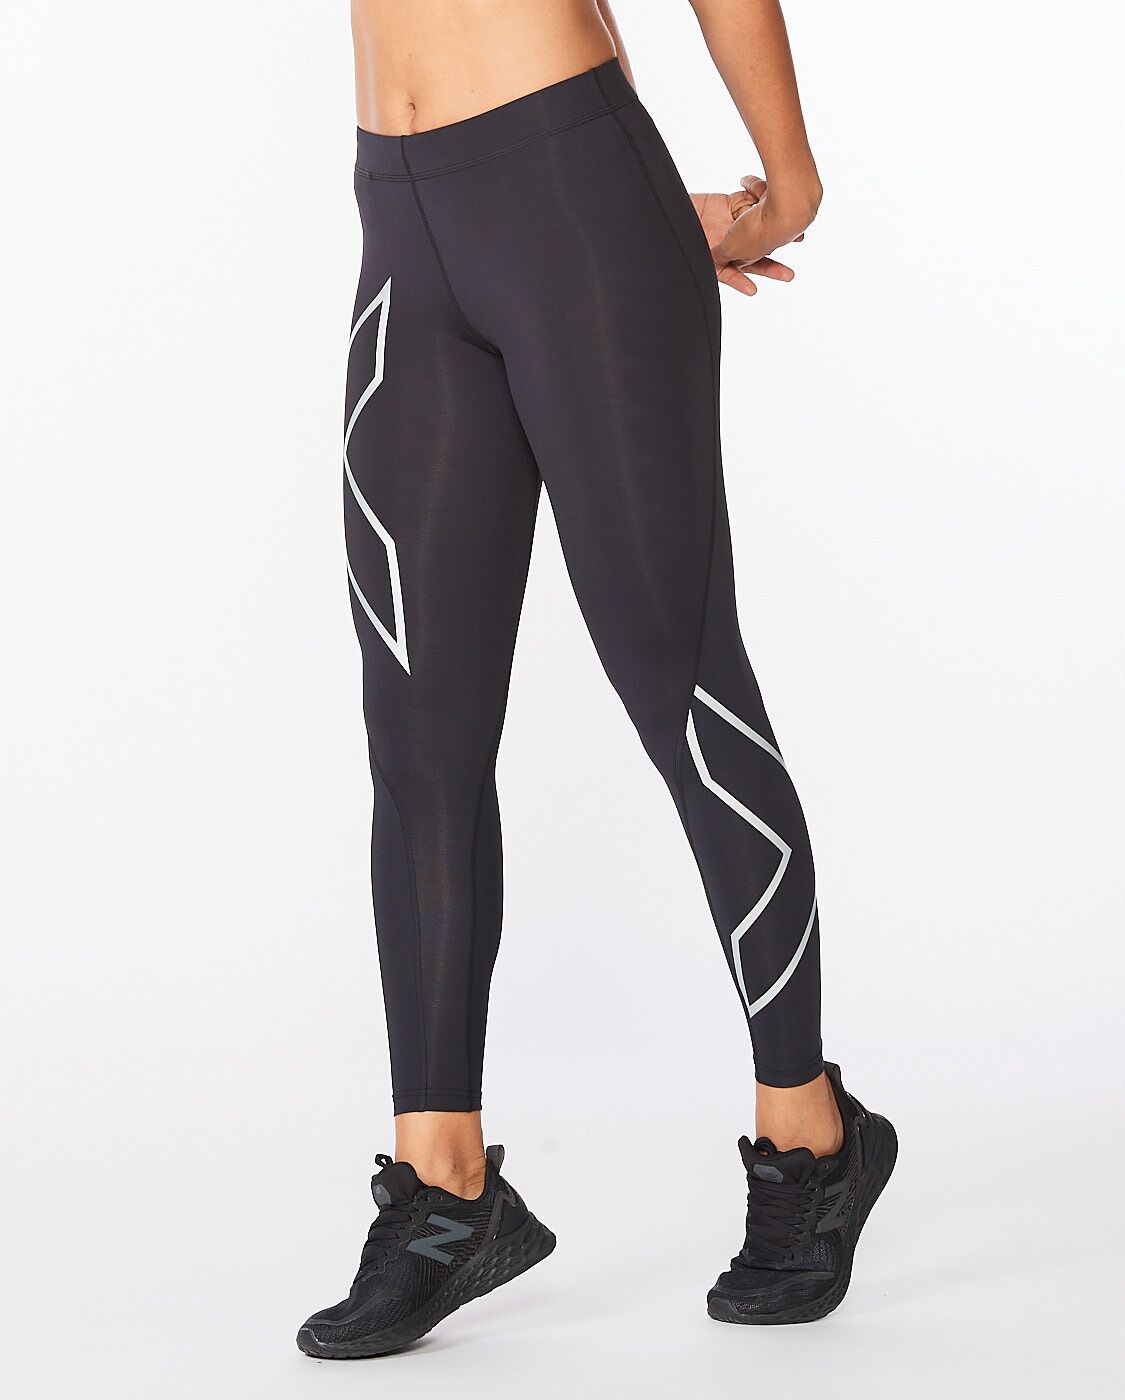 2XU South Africa - Women's Core Compression Tights - Black/Silver